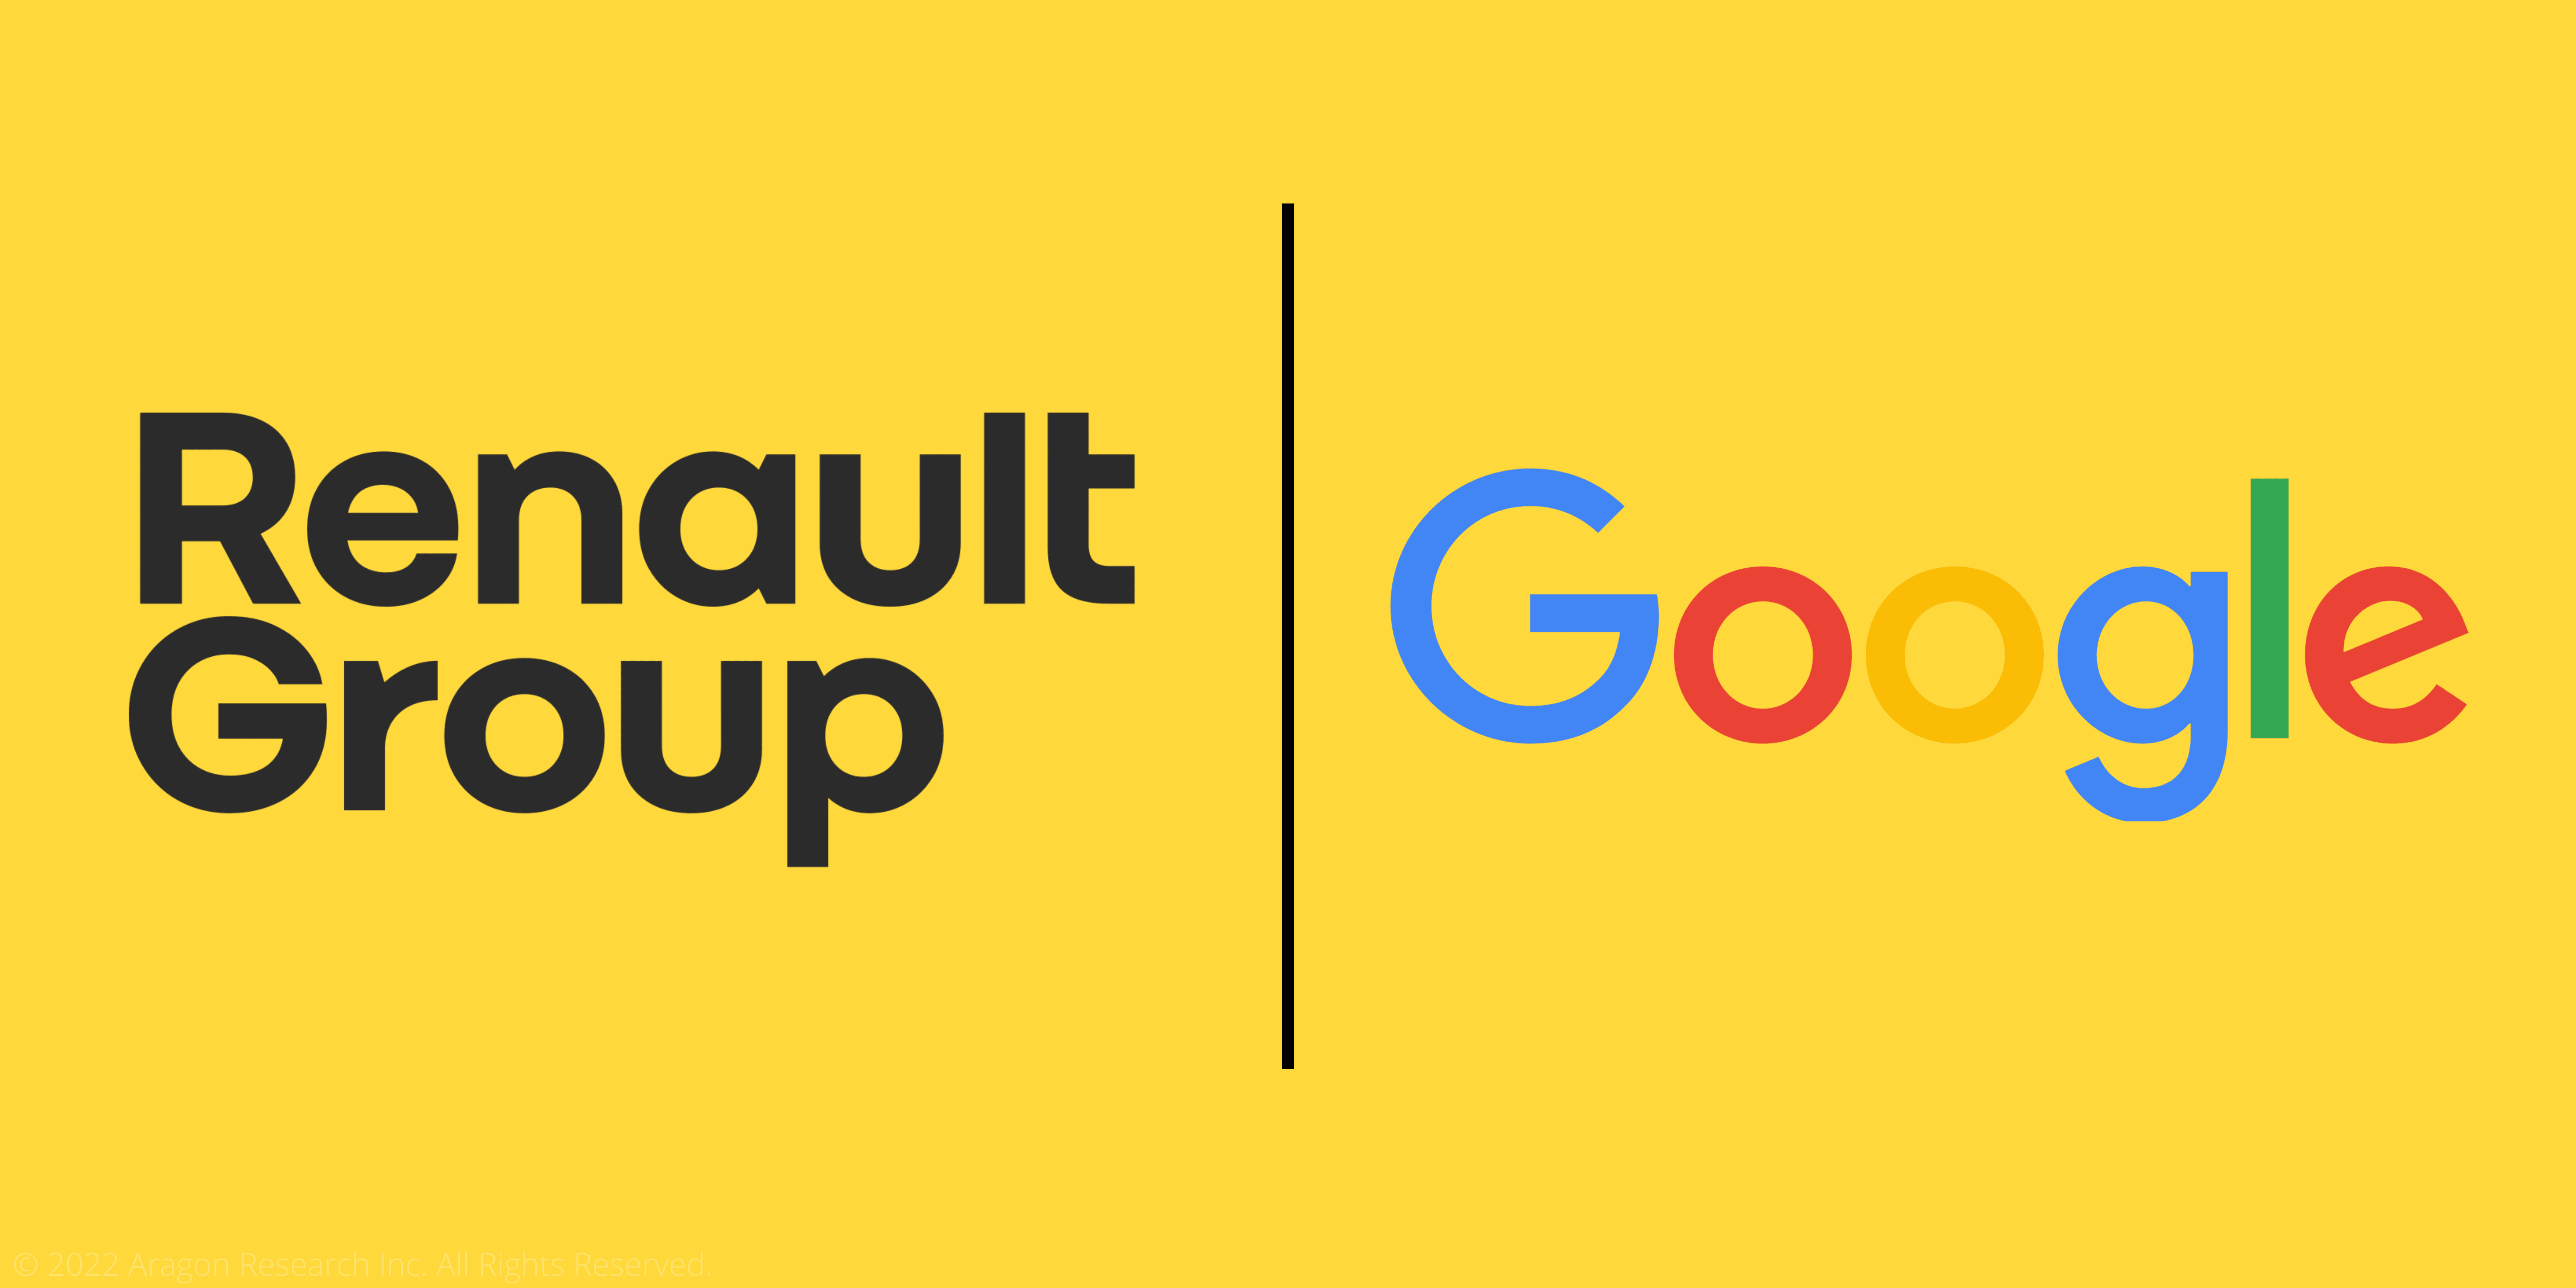 Renault Google Banner - Google and Renault Announce Software-Defined Vehicle